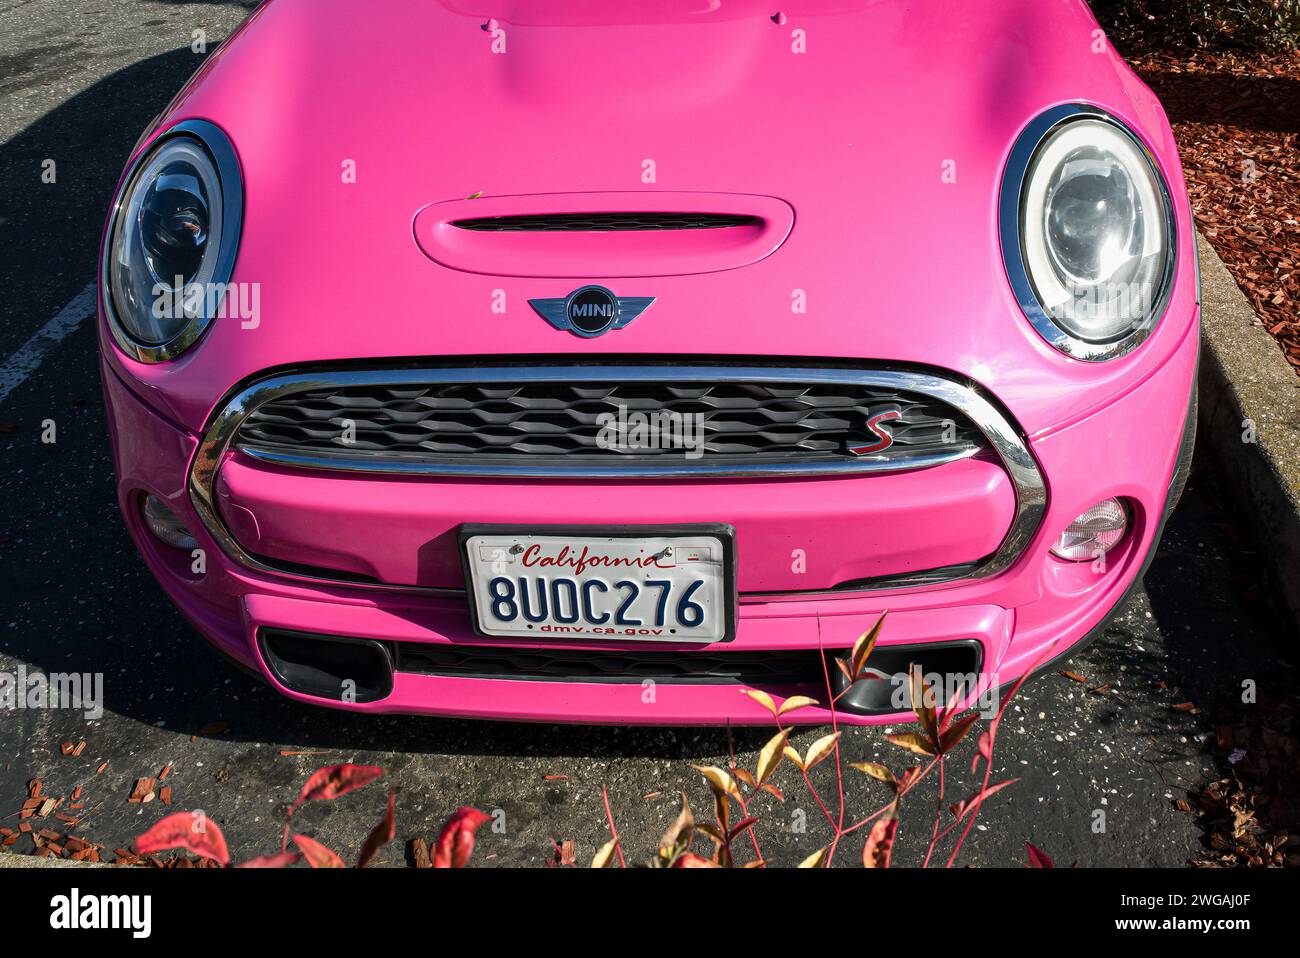 Front of a hot pink Mini Cooper S car in a parking lot. Stock Photo